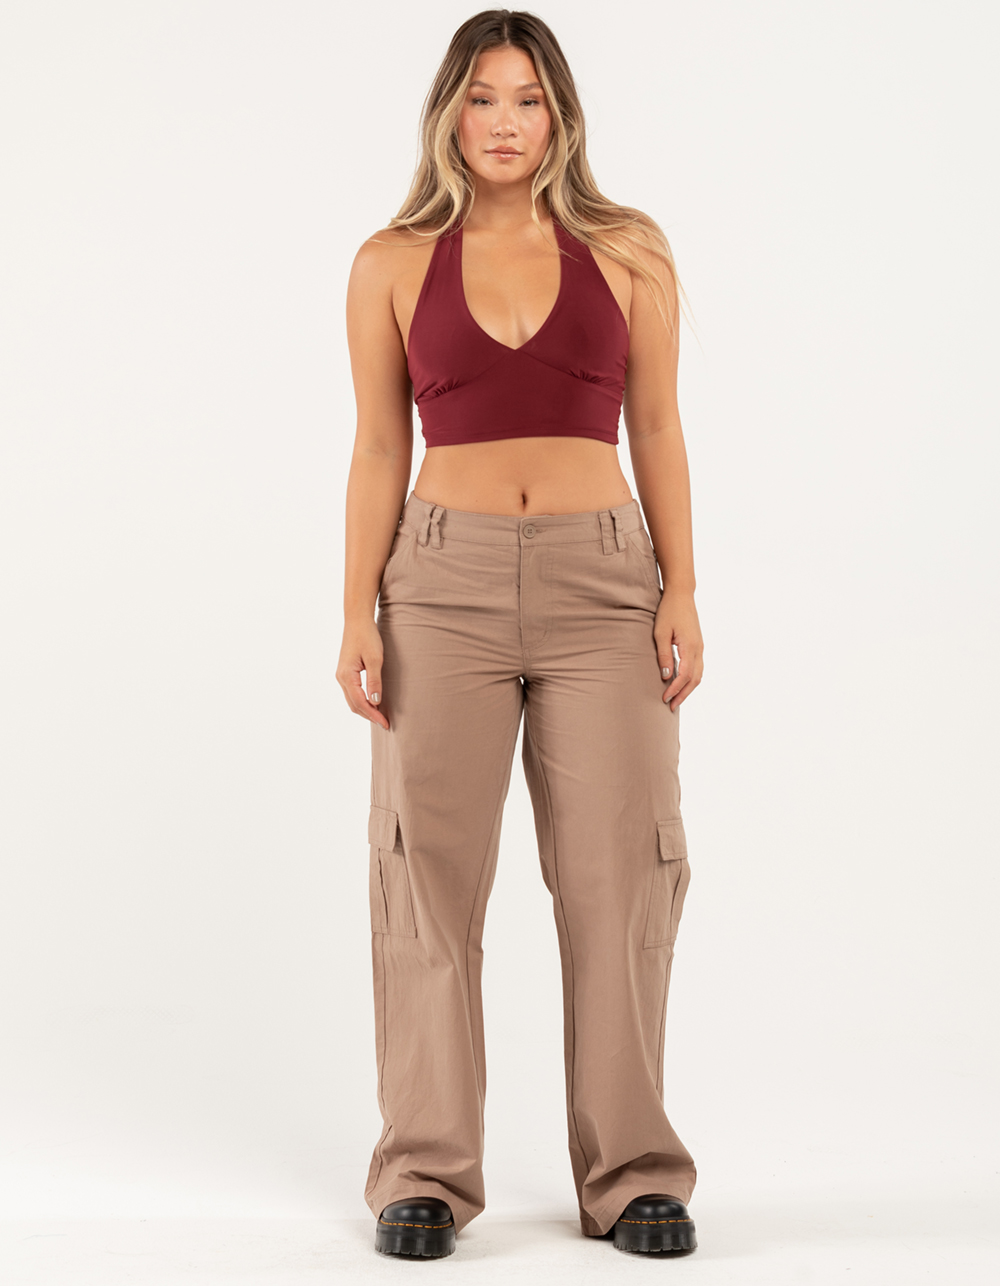 RSQ Womens Solid Halter Top - BURGUNDY